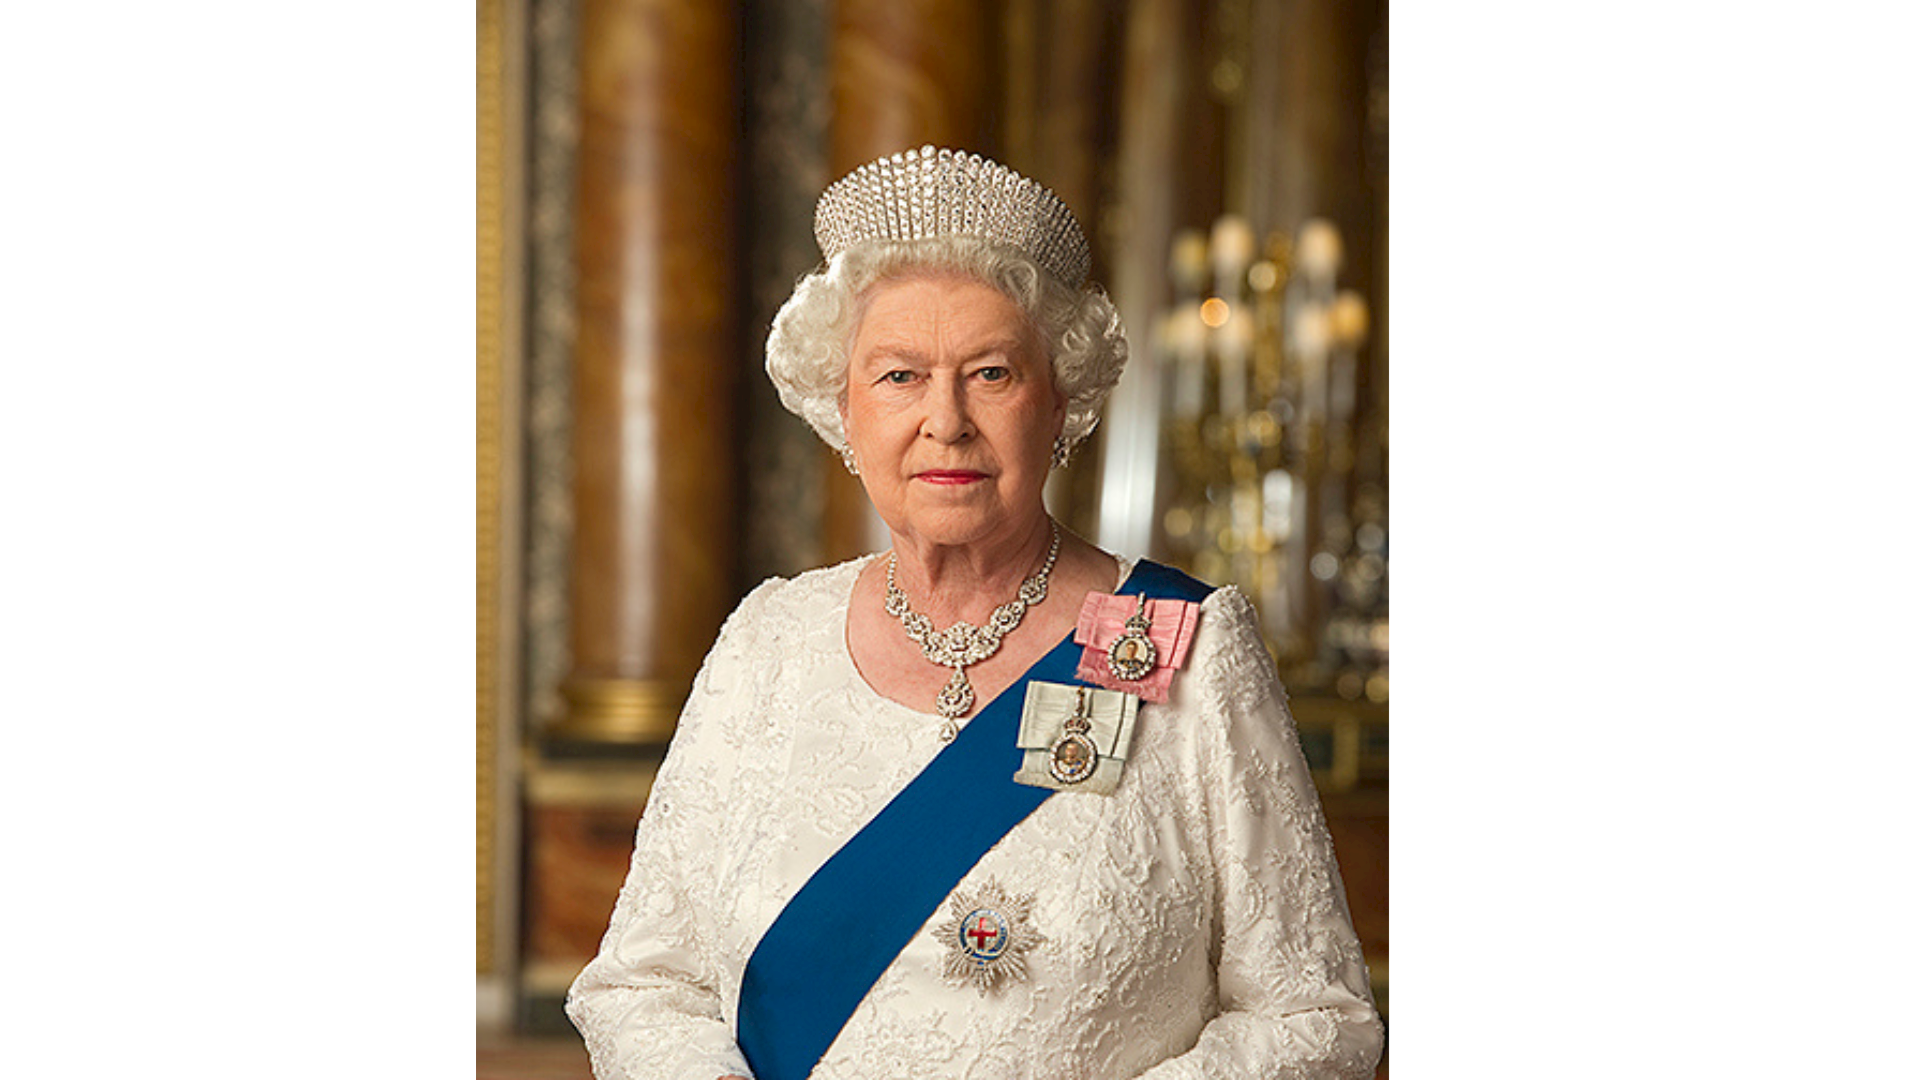 Her Majesty the Queen 2022